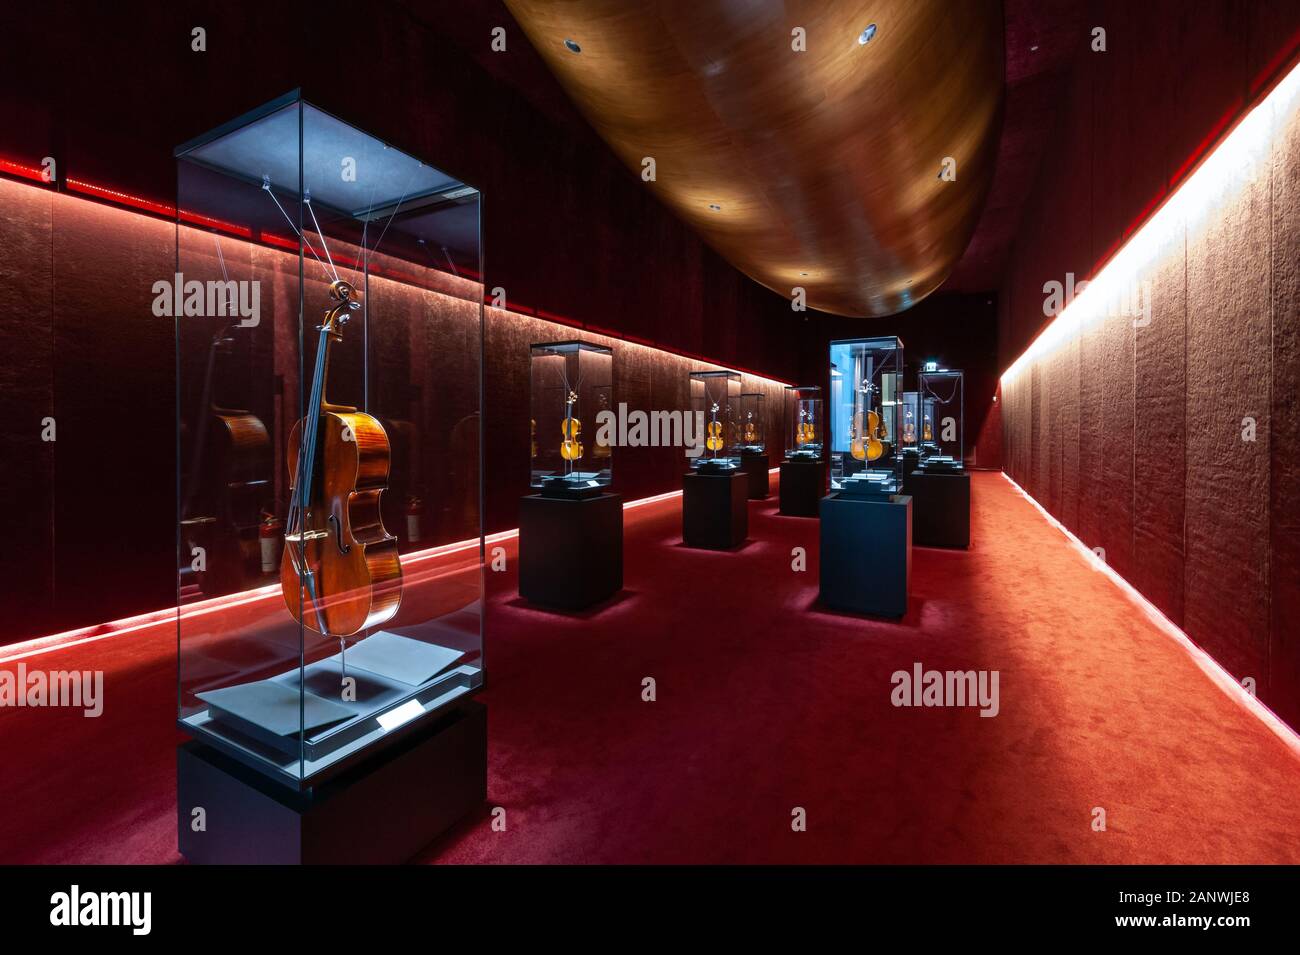 The 'Treasure Chest' at the Violin Museum in Cremona, Lombardy, Italy, gallery of ancient stringed instruments by Stradivari, Amati, and Guarneri Stock Photo